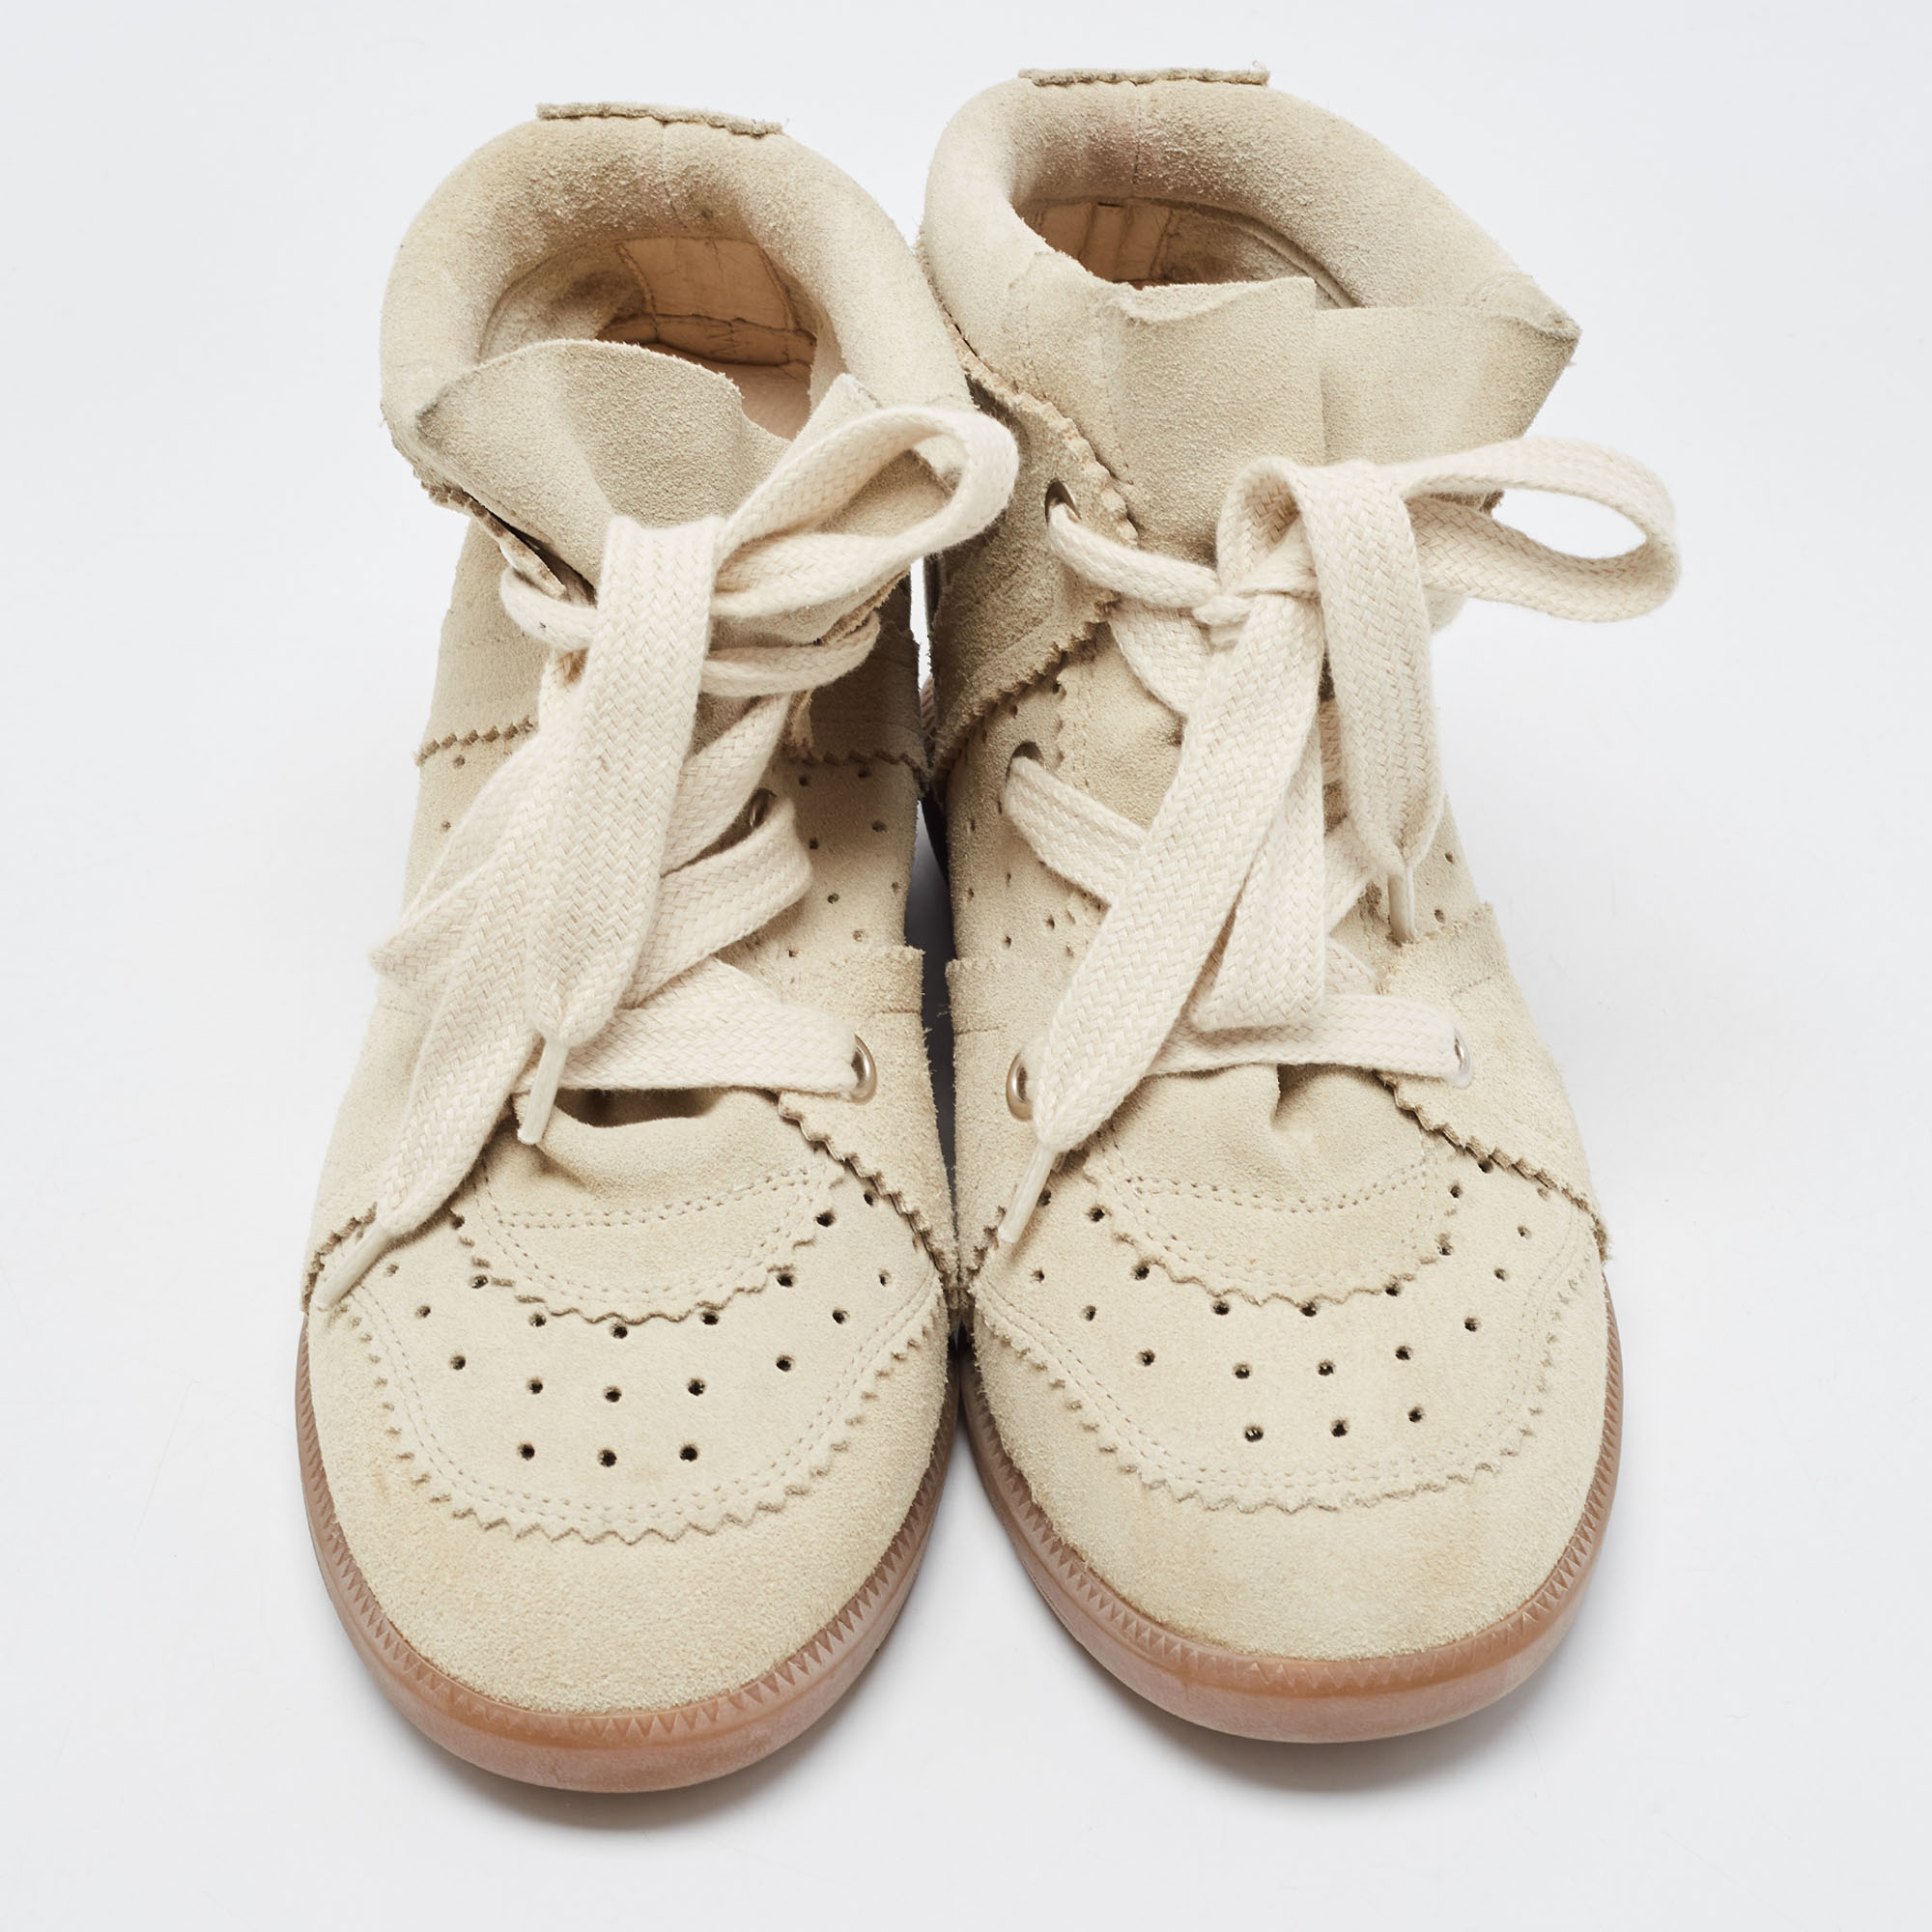 Isabel Marant Beige Suede Bobby  Wedge High Top Sneakers Size 40